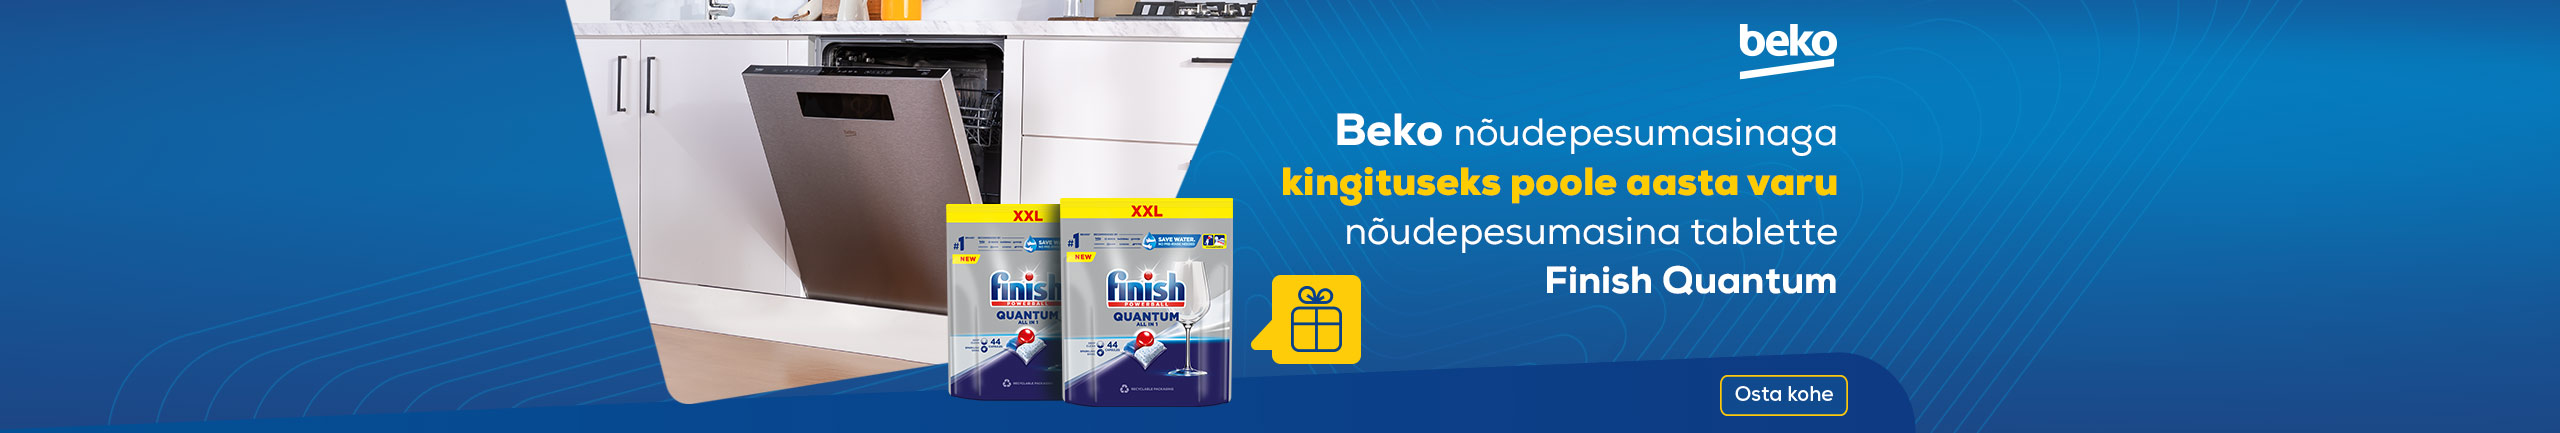 Buy Beko dishwasher and receive a gift!